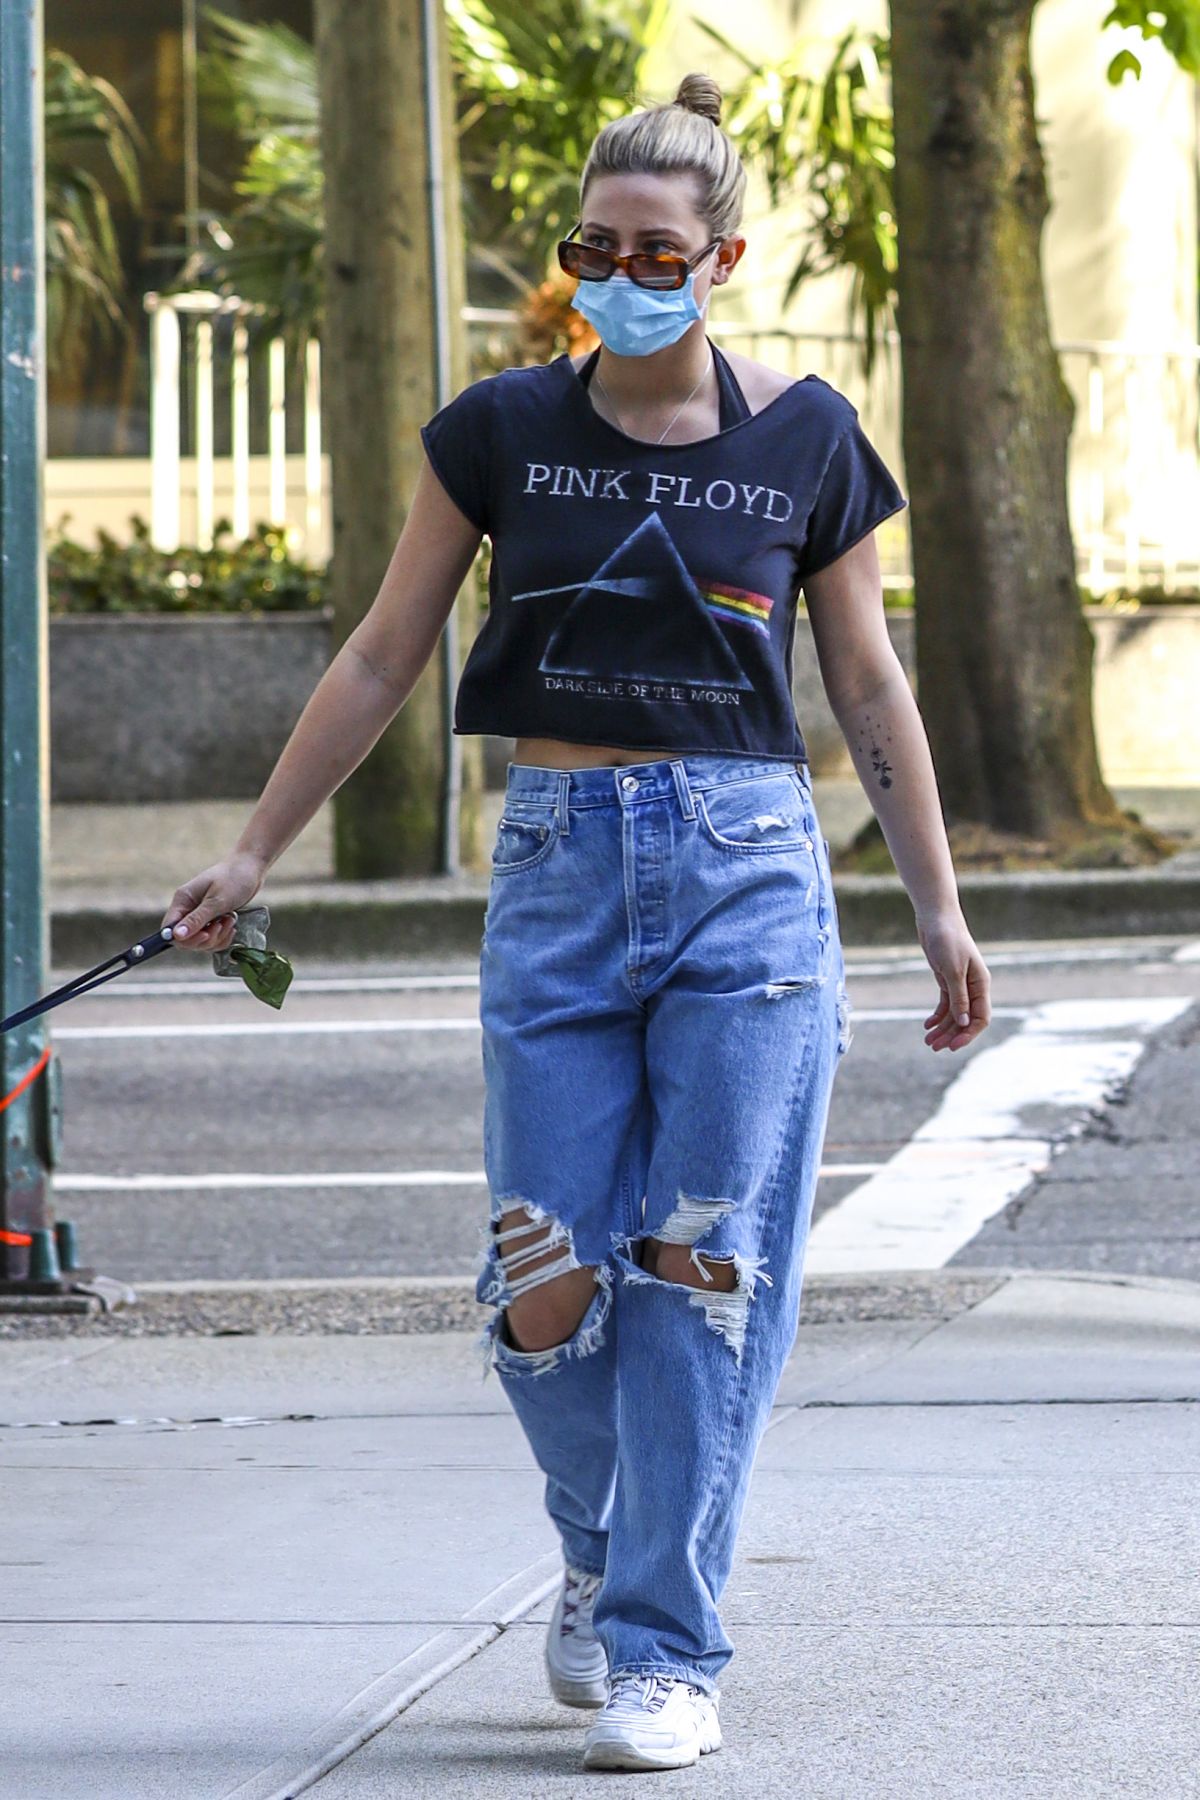 lili-reinhart-in-ripped-denim-out-with-her-dog-in-vancouver-05-02-2021-6.jpg